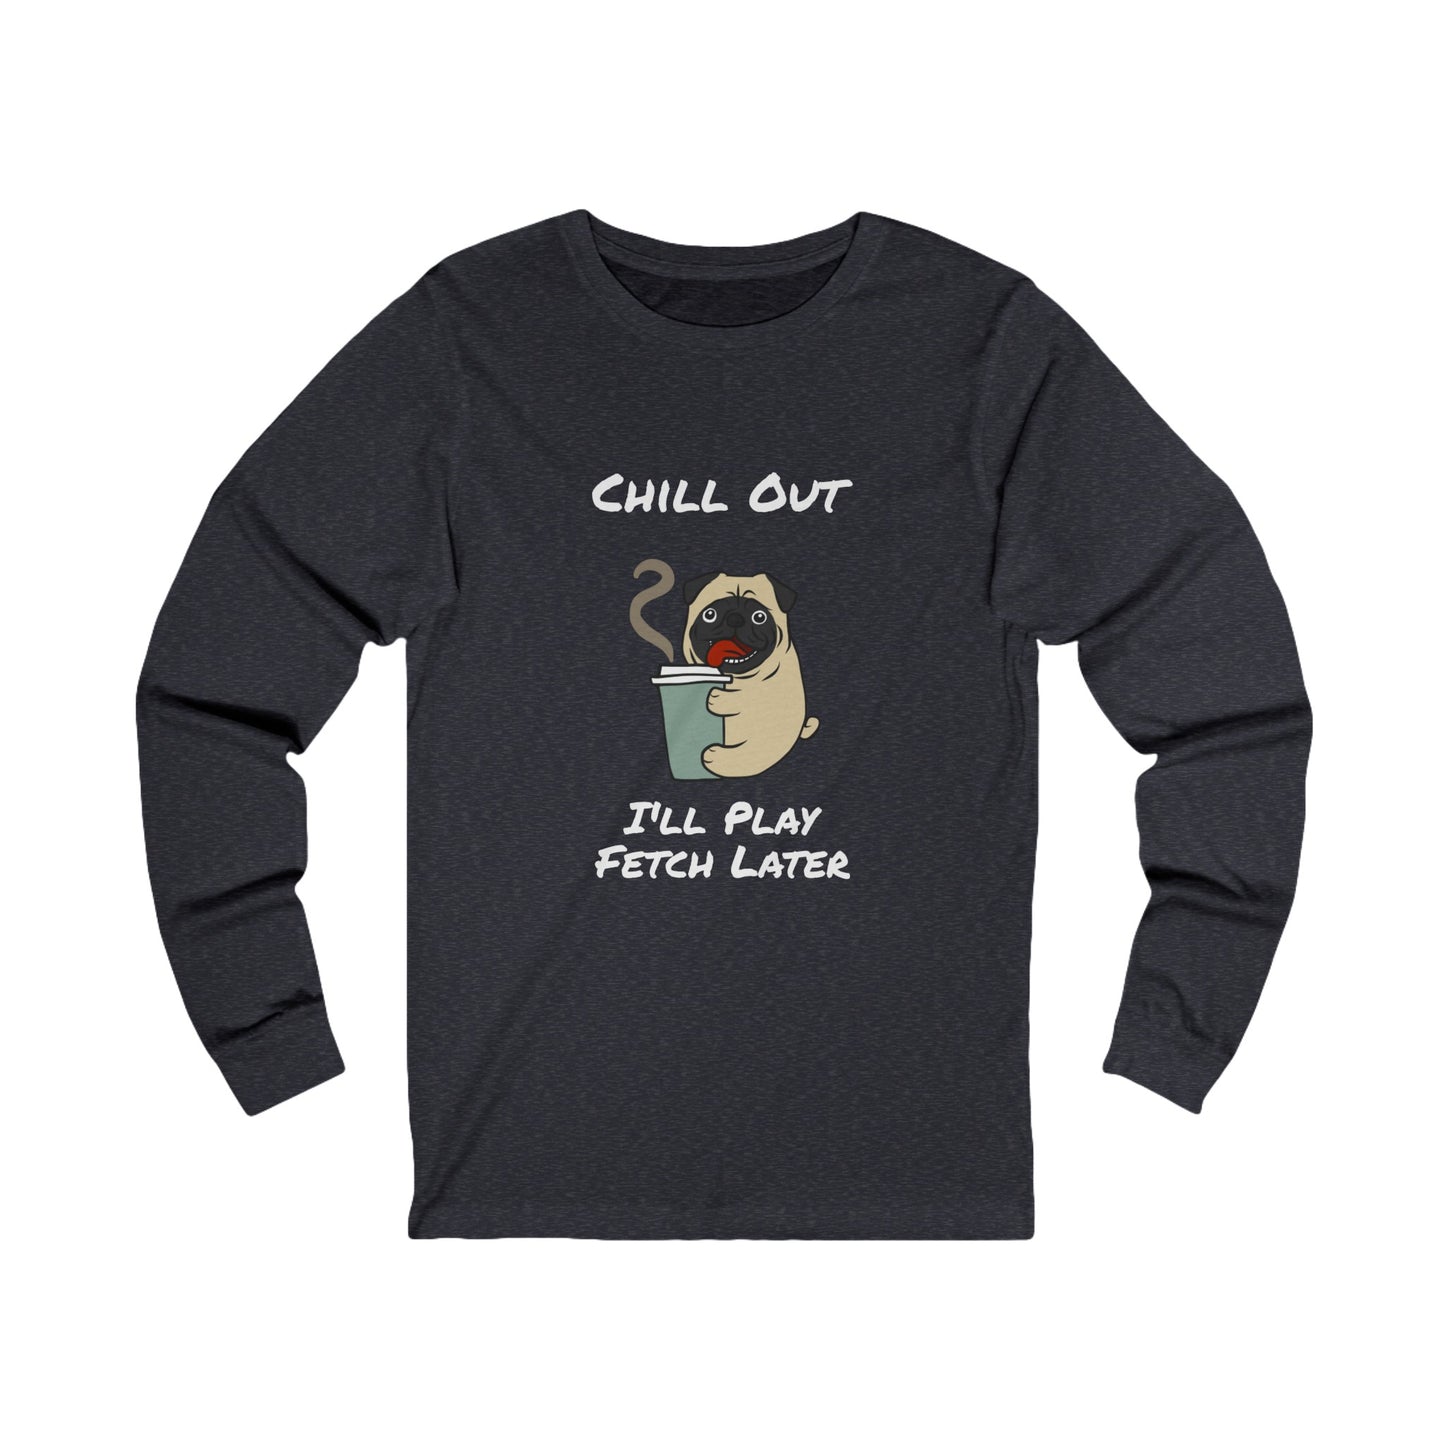 Chill Out.  I'll Play Fetch  Later. Unisex Jersey Long Sleeve Tee.